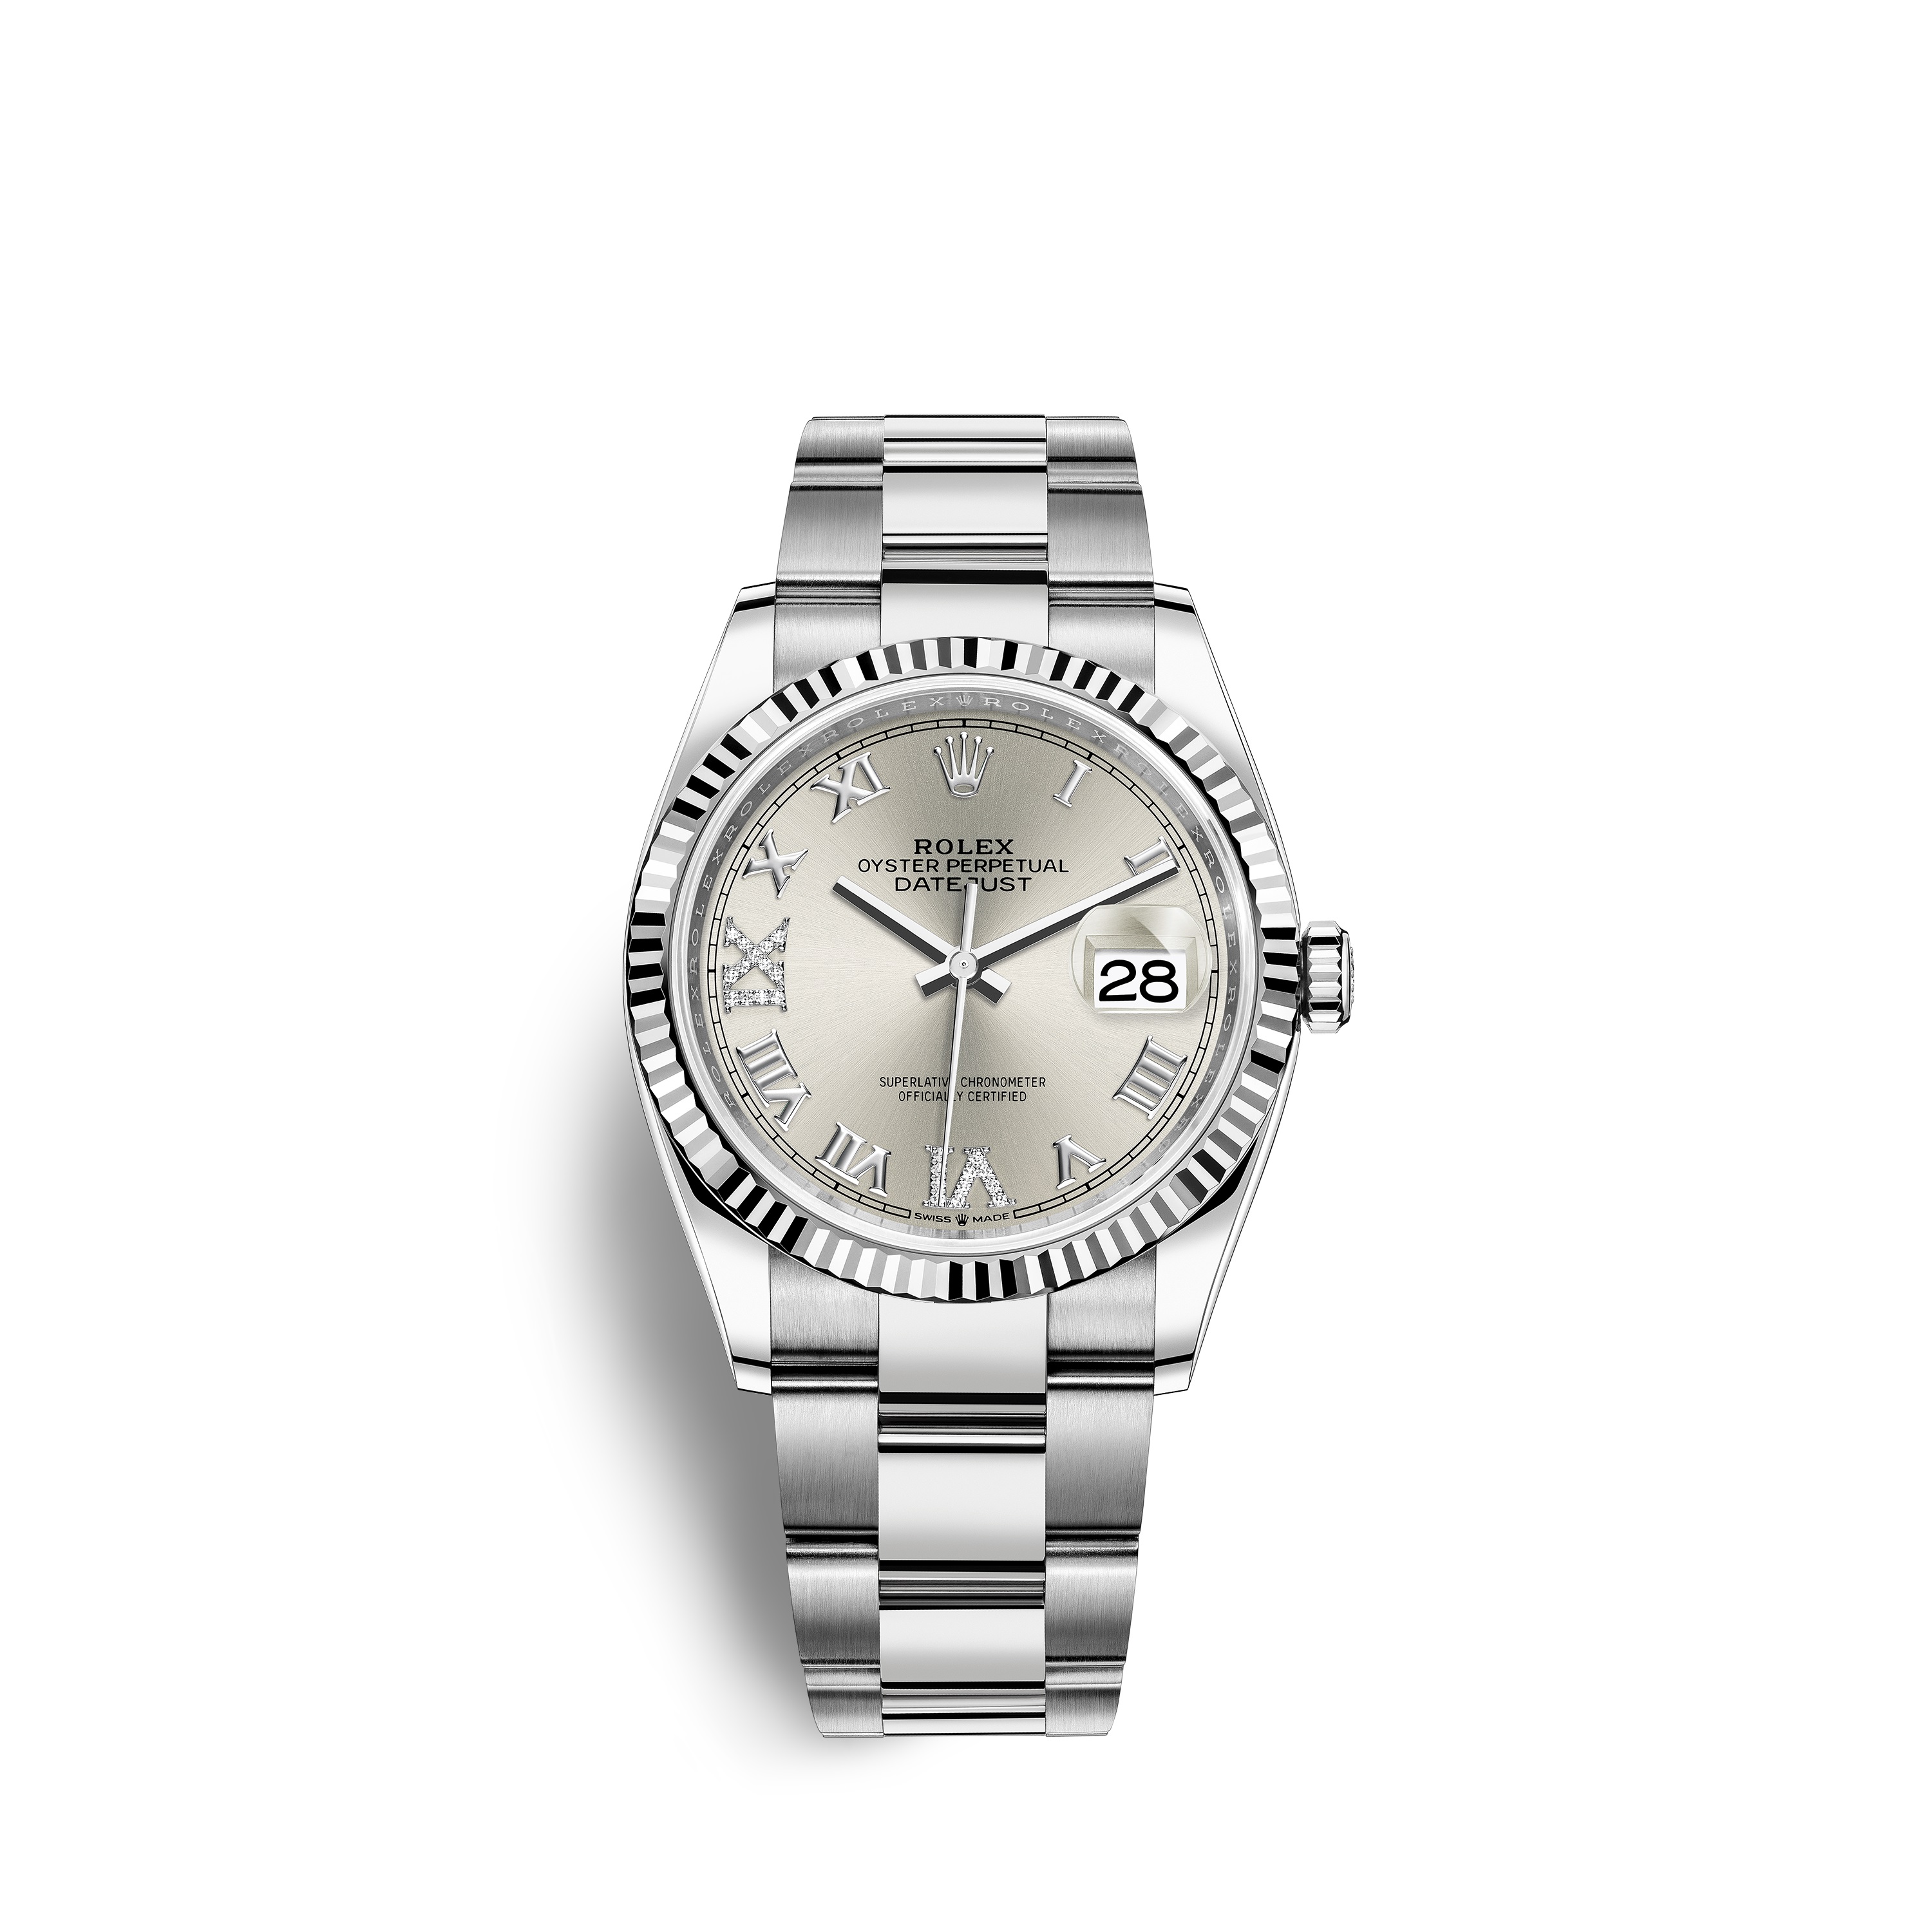 Datejust 36 126234 White Gold & Stainless Steel Watch (Silver Set with Diamonds)